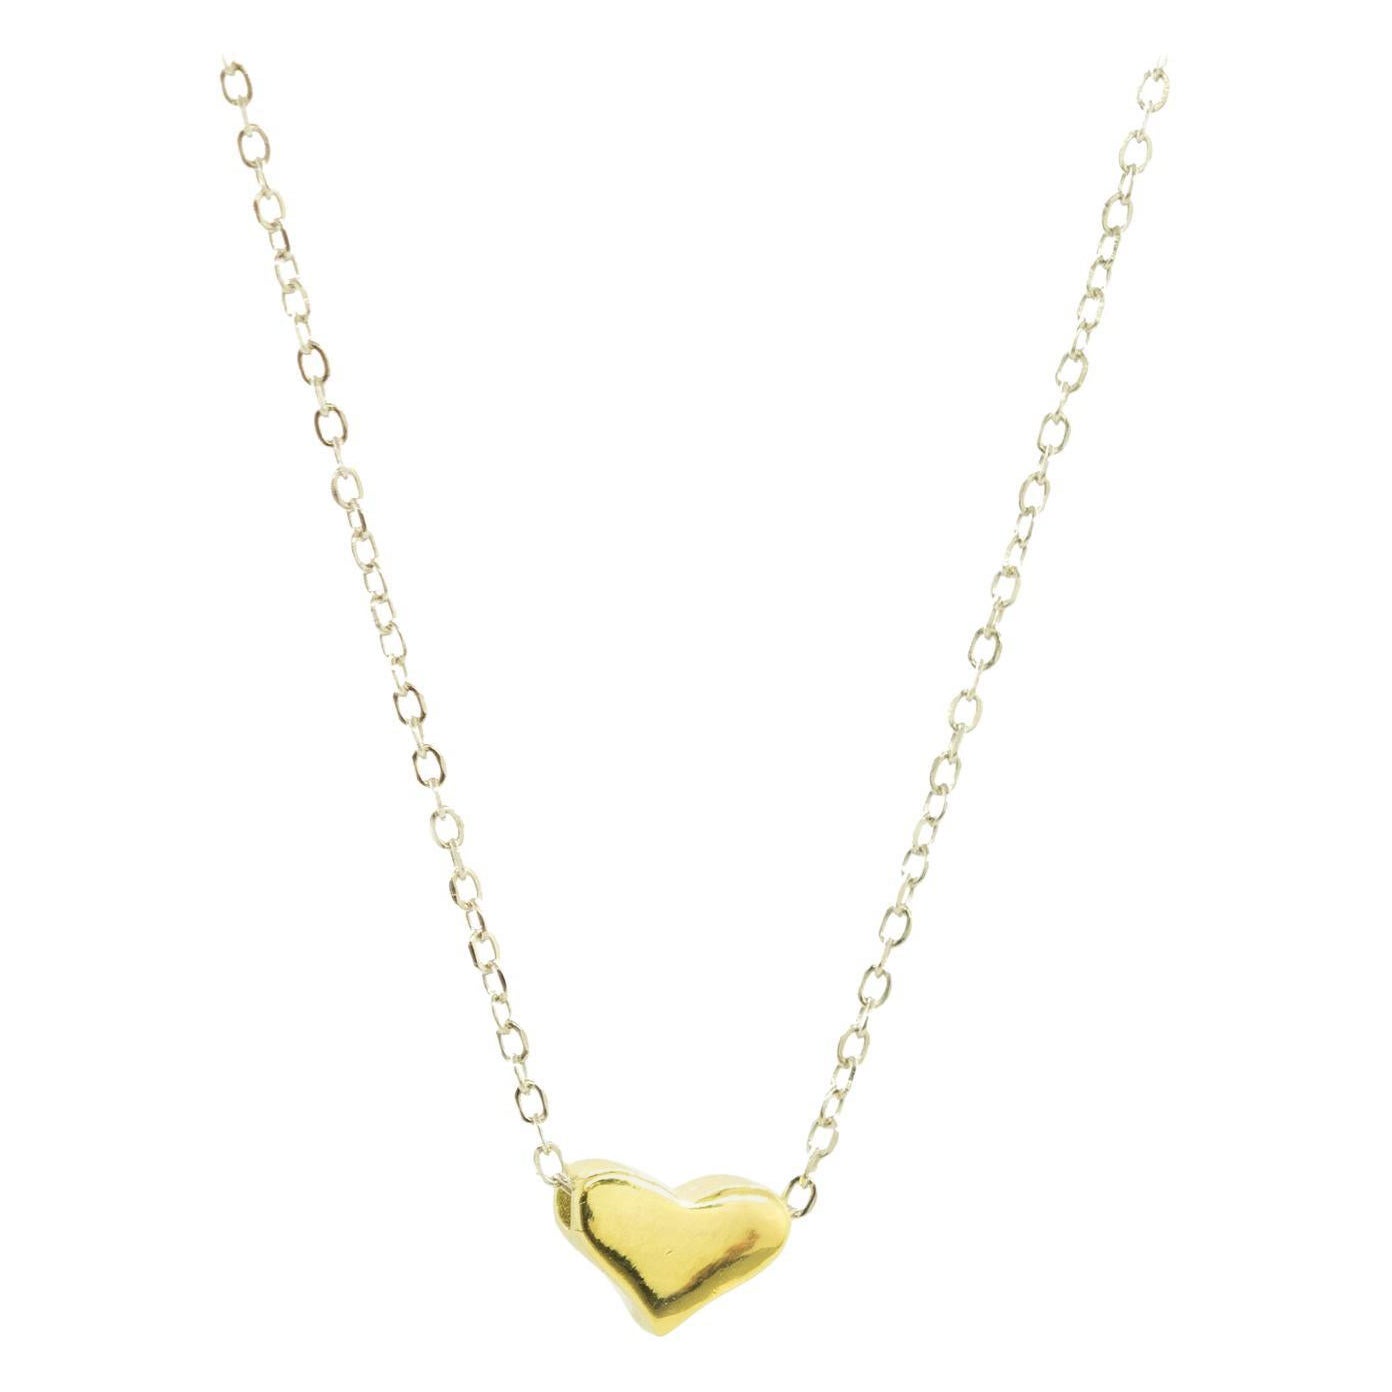 Intini Jewels 925 Sterling Silver Gold Filled Heart Pendant Chain Love Necklace